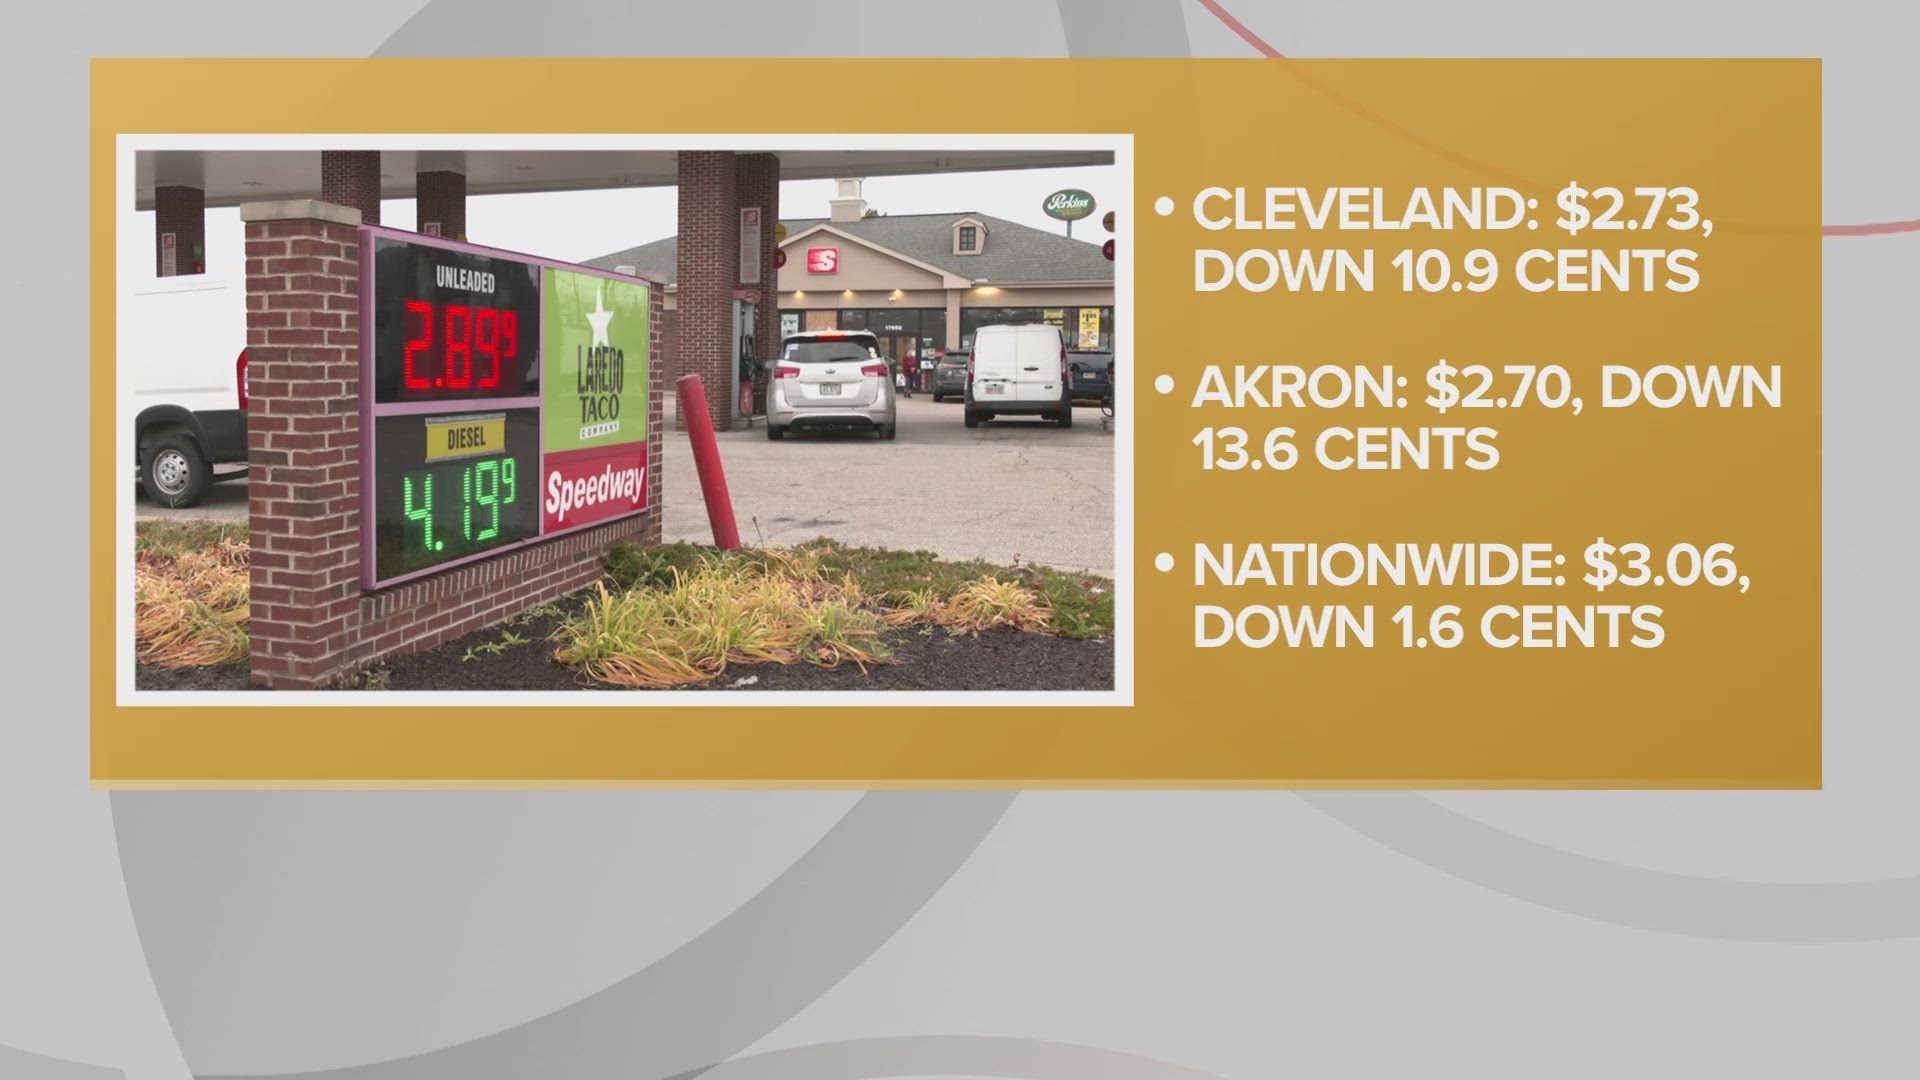 The Great Lakes and Gulf Coast offer some of the nation's lowest gas prices, according to GasBuddy.